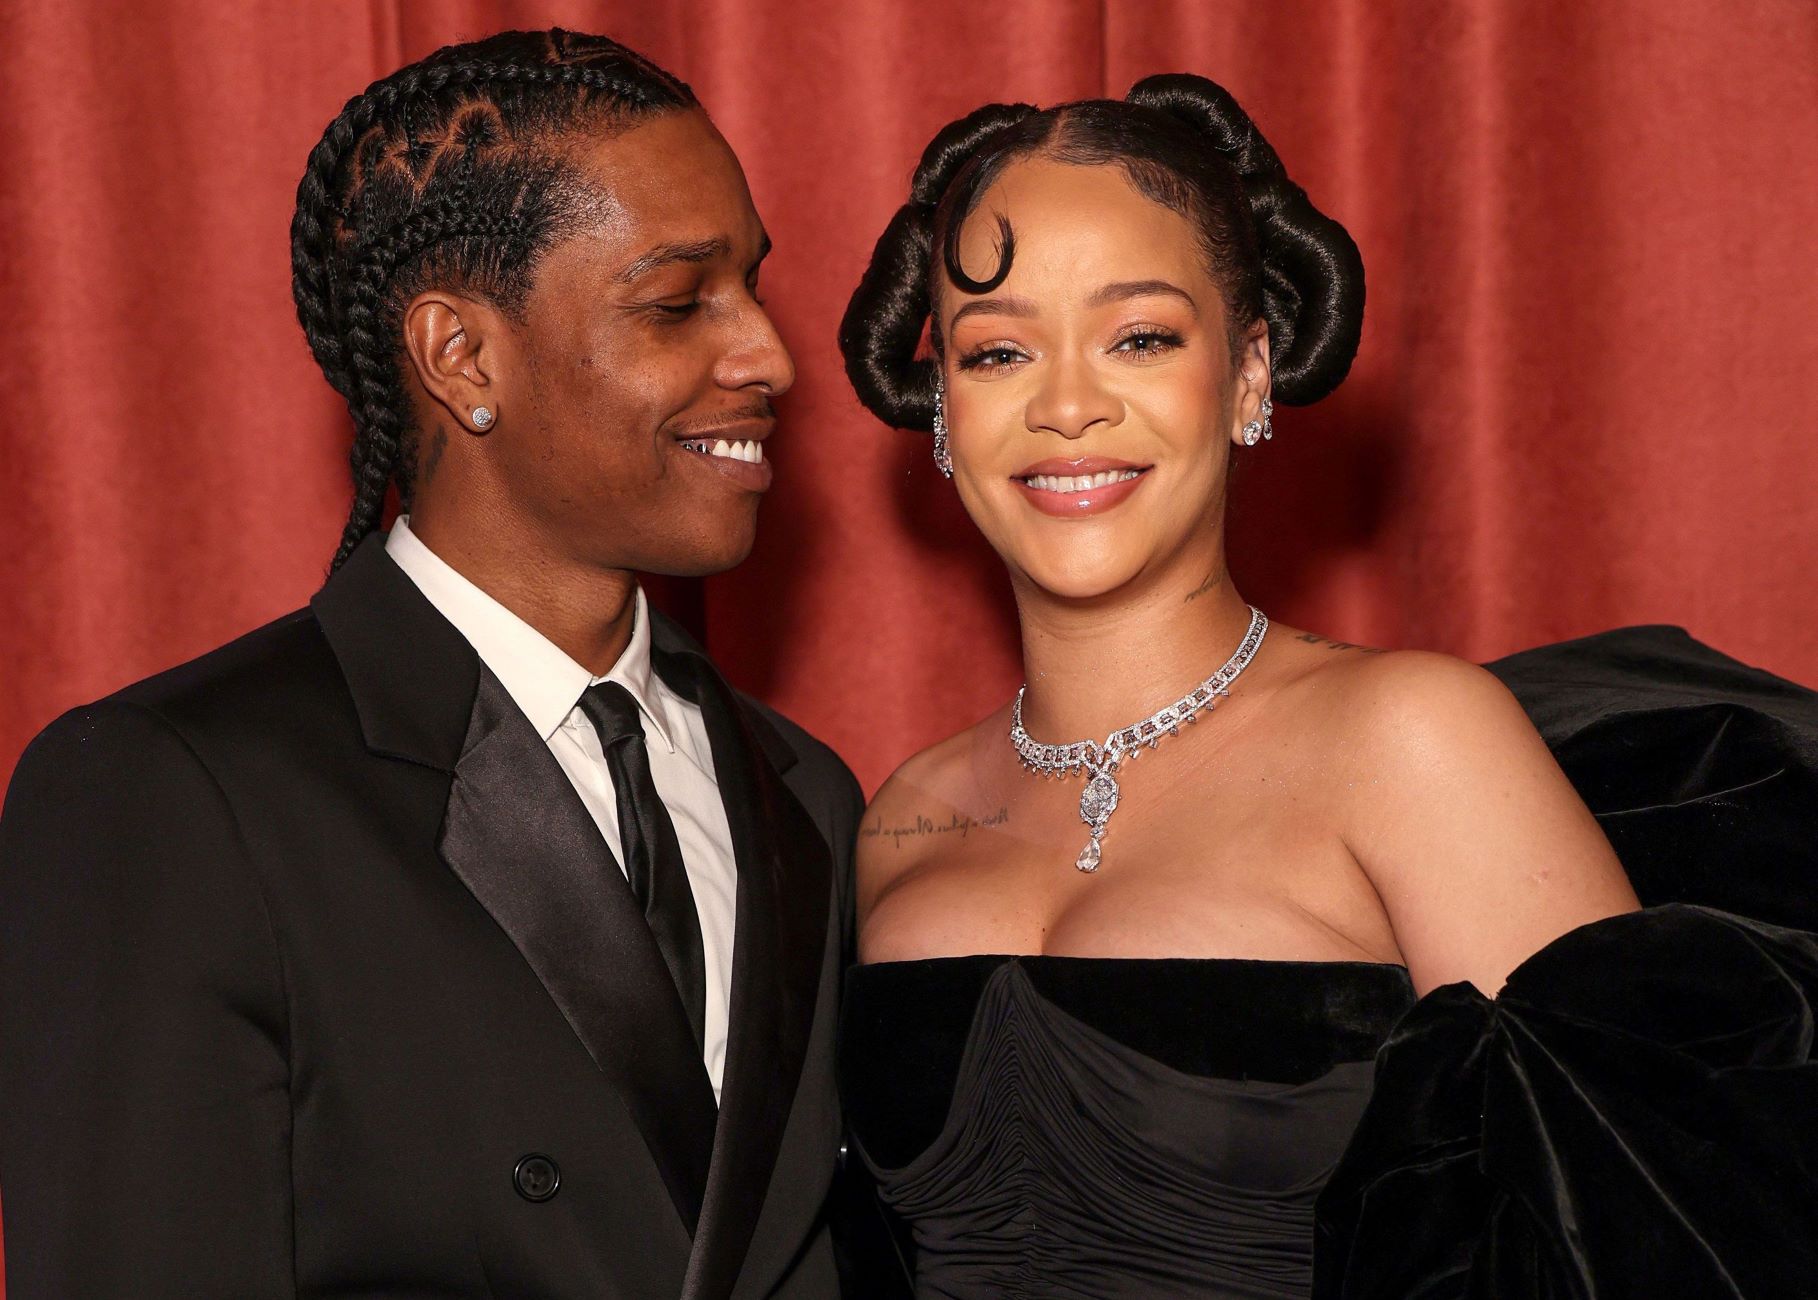 rihanna-and-aap-rocky-finally-reveal-their-newborn-son-in-a-heartwarming-family-photoshoot